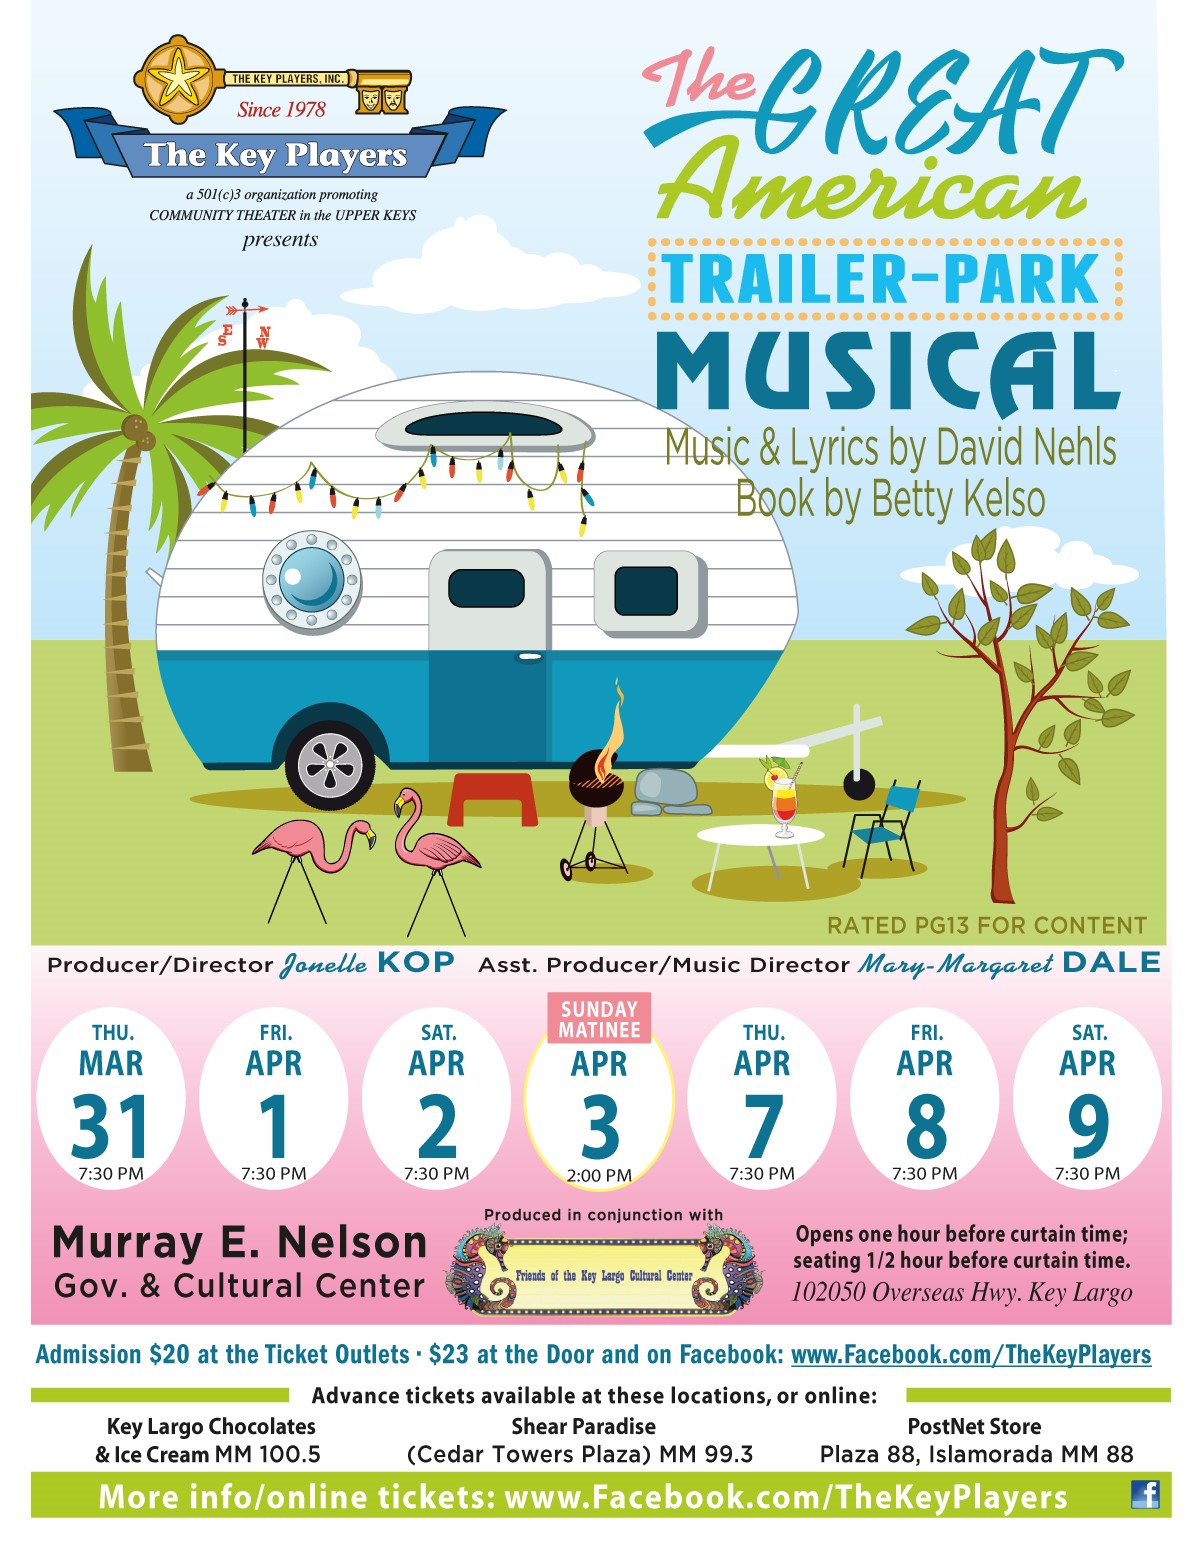 Flyer for The Great American Trailer Park Musical which features a trailer with flamingos, a table, and a palm tree